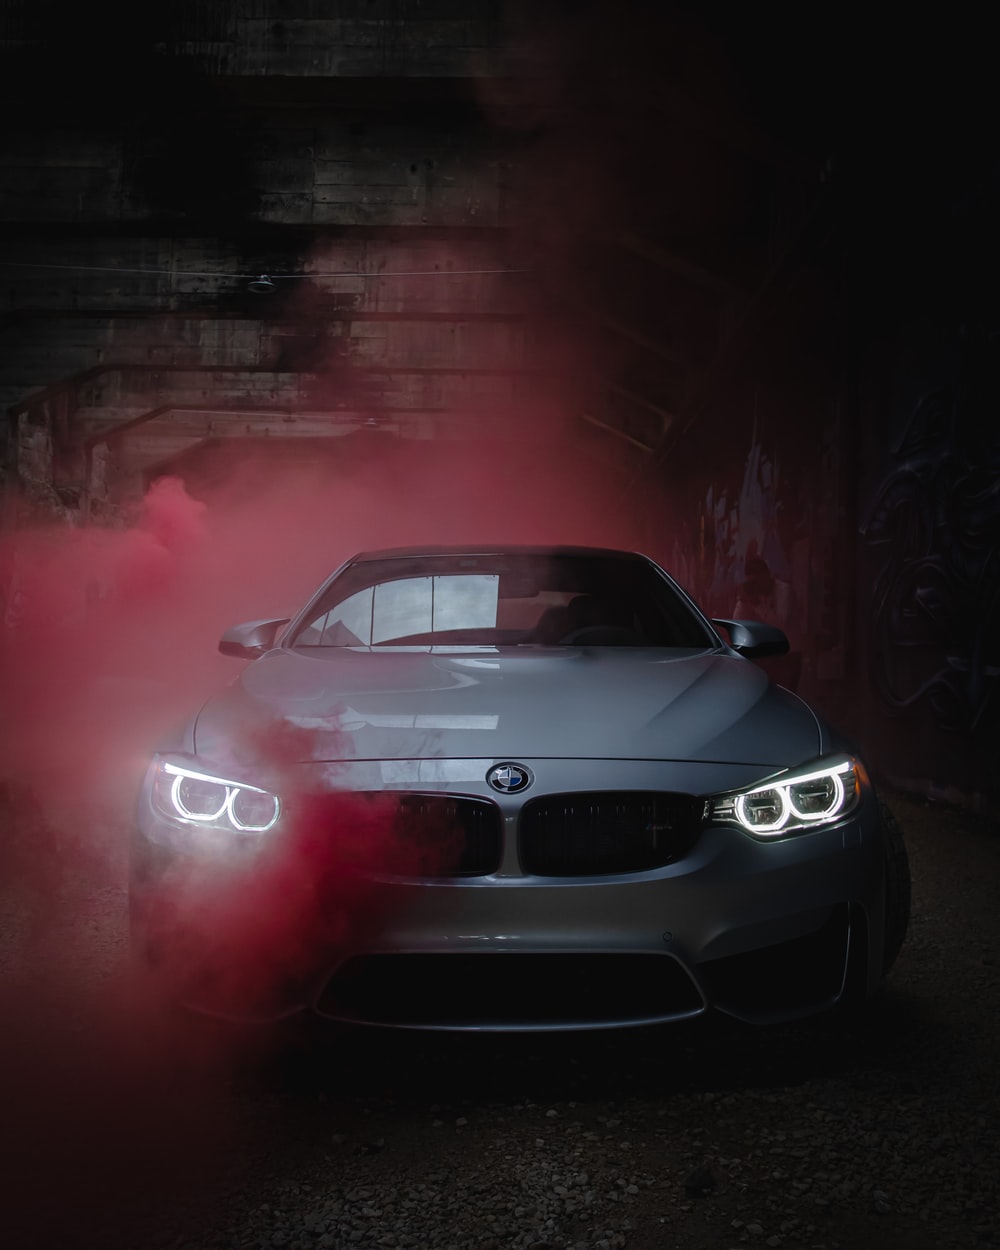 Bmw M4 Picture [HD]. Download Free Image